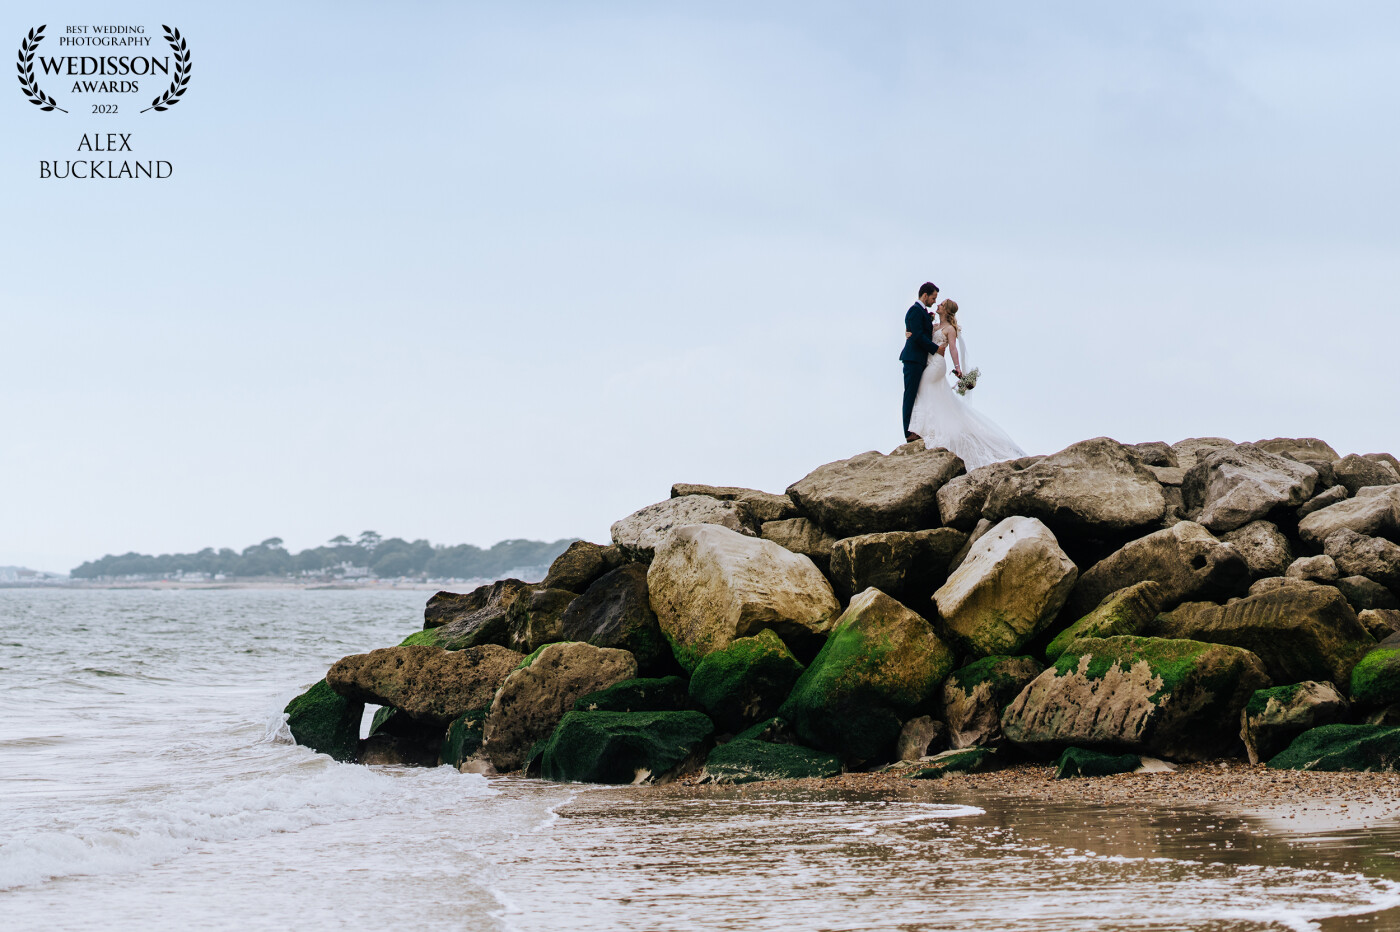 Whilst capturing portraits on the beach with this couple, I noticed a jetty that would serve as a great spot for the couple to pose, together with the sea and rocks it turned into a wonderful scene for this romantic photo!